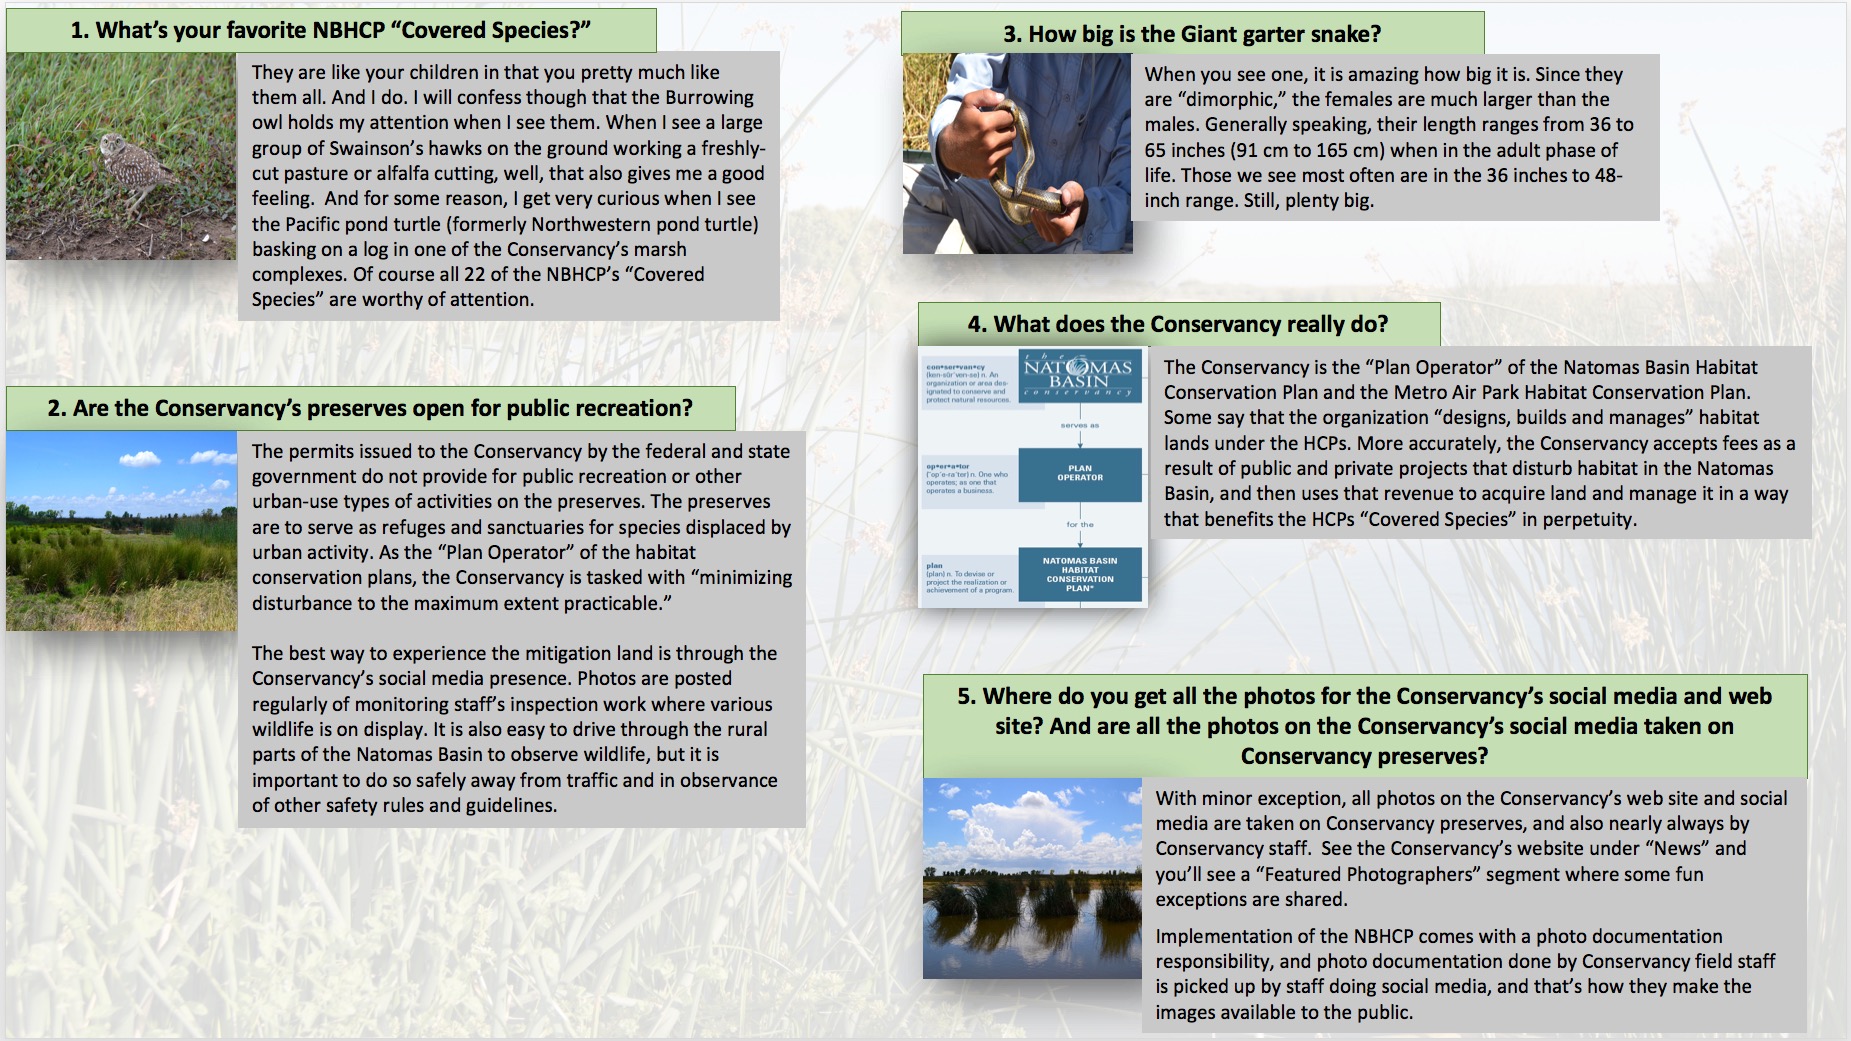 five text question and answers from Conservancy Executive Director, John Roberts, with images next to each answer